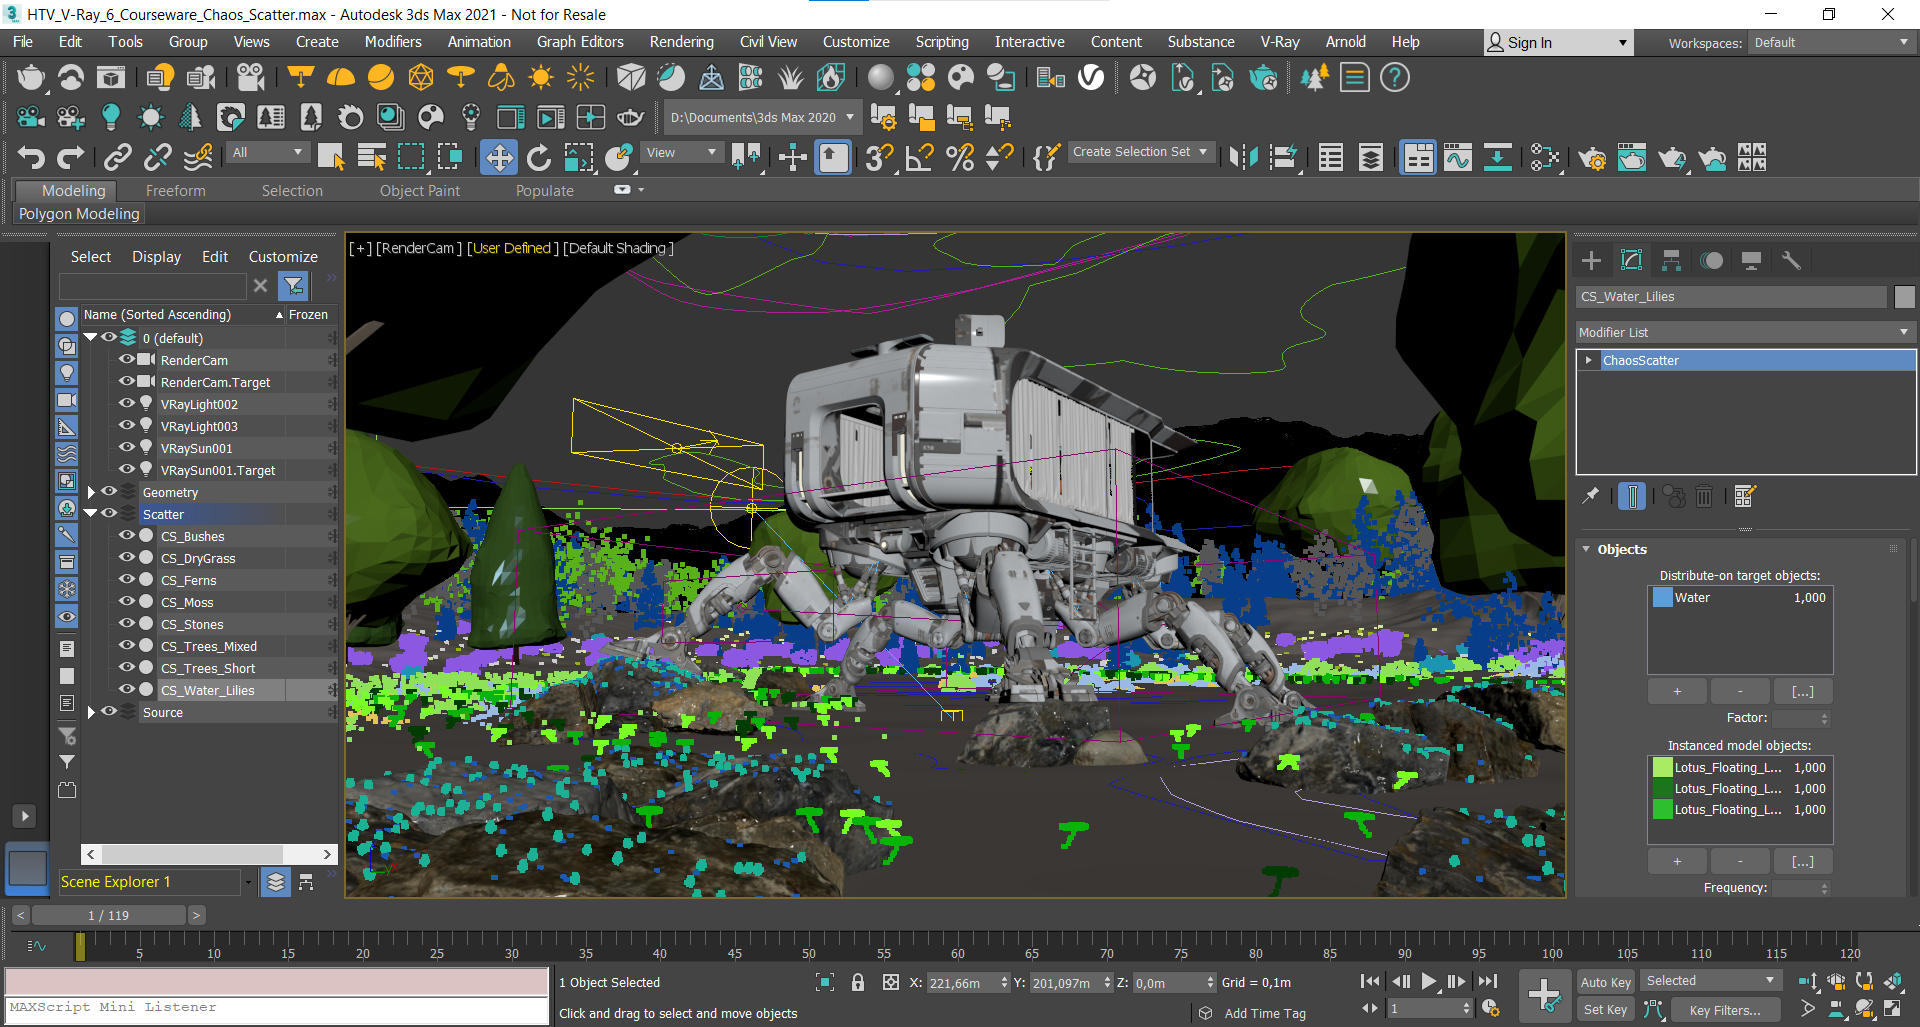 how-we-made-chaos-scatter-v-ray-image4.png